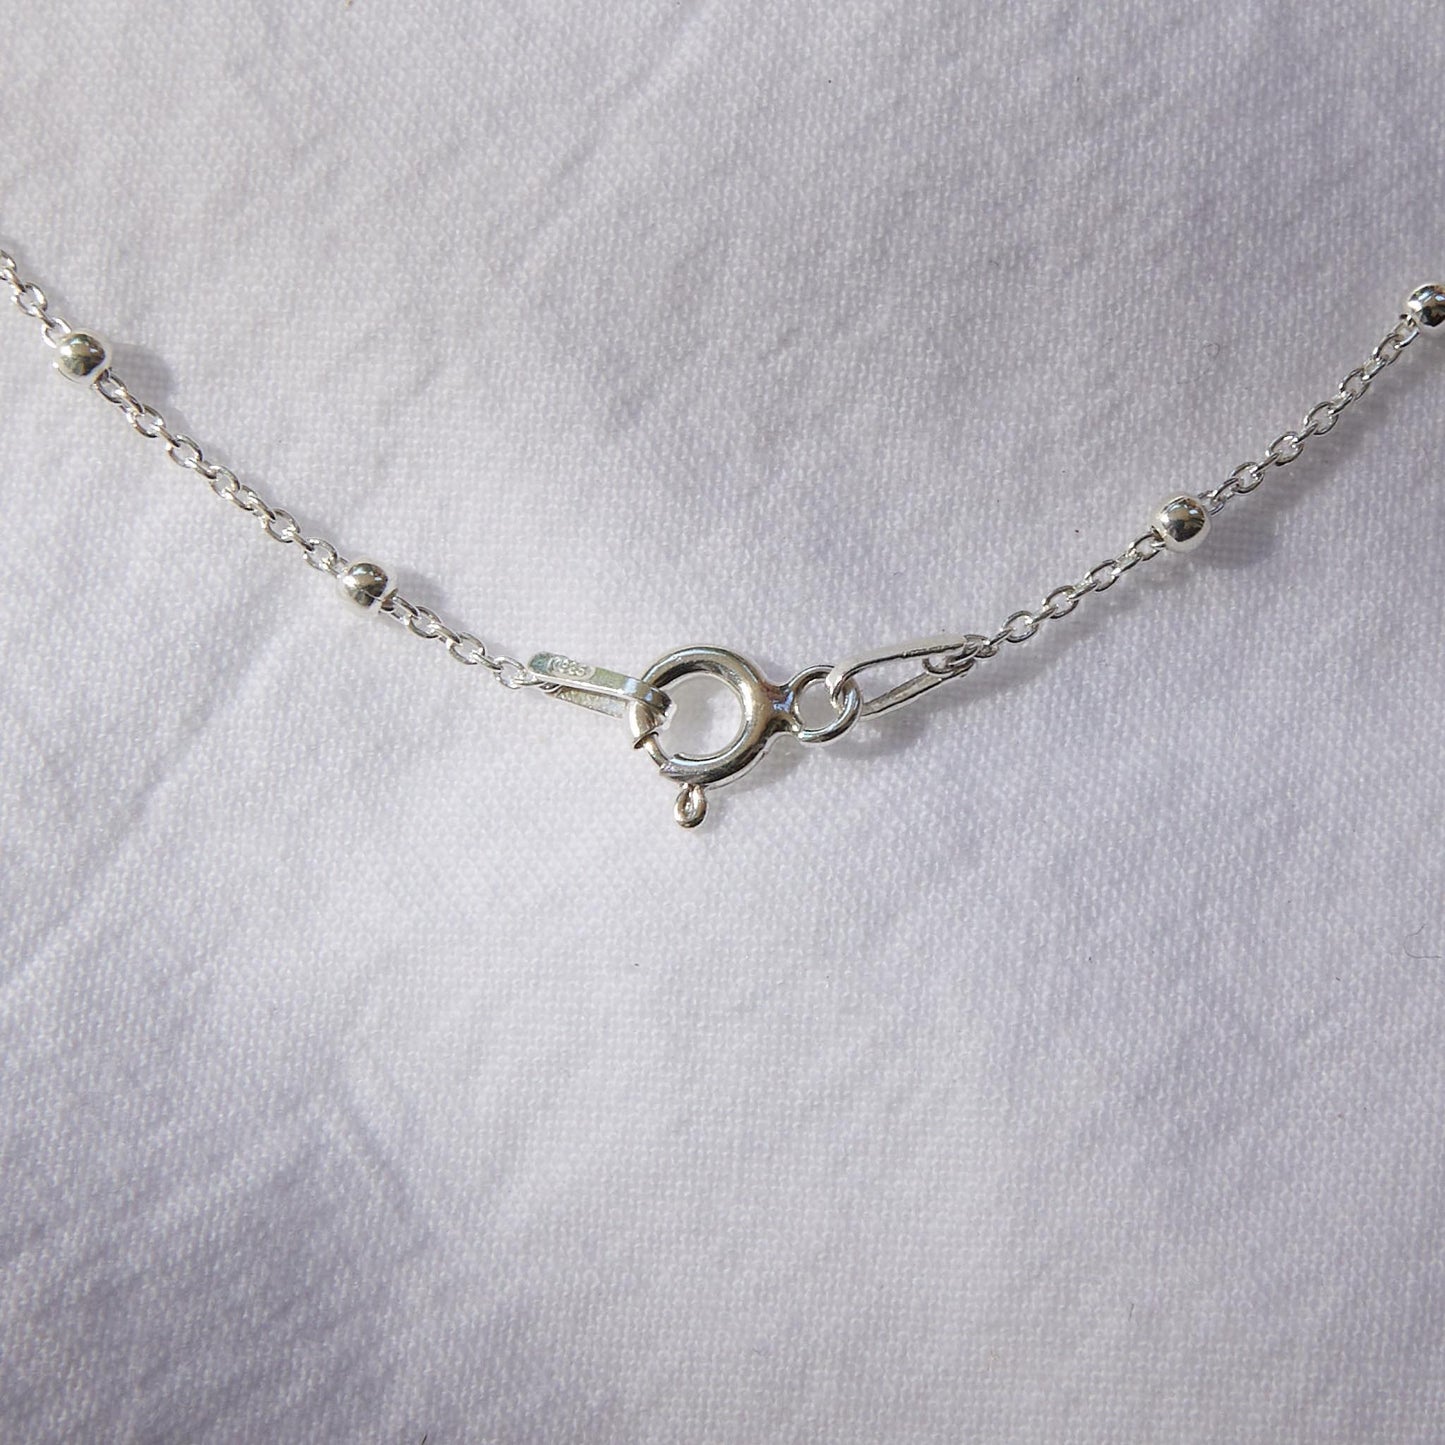 Sunrise on sterling silver ball chain